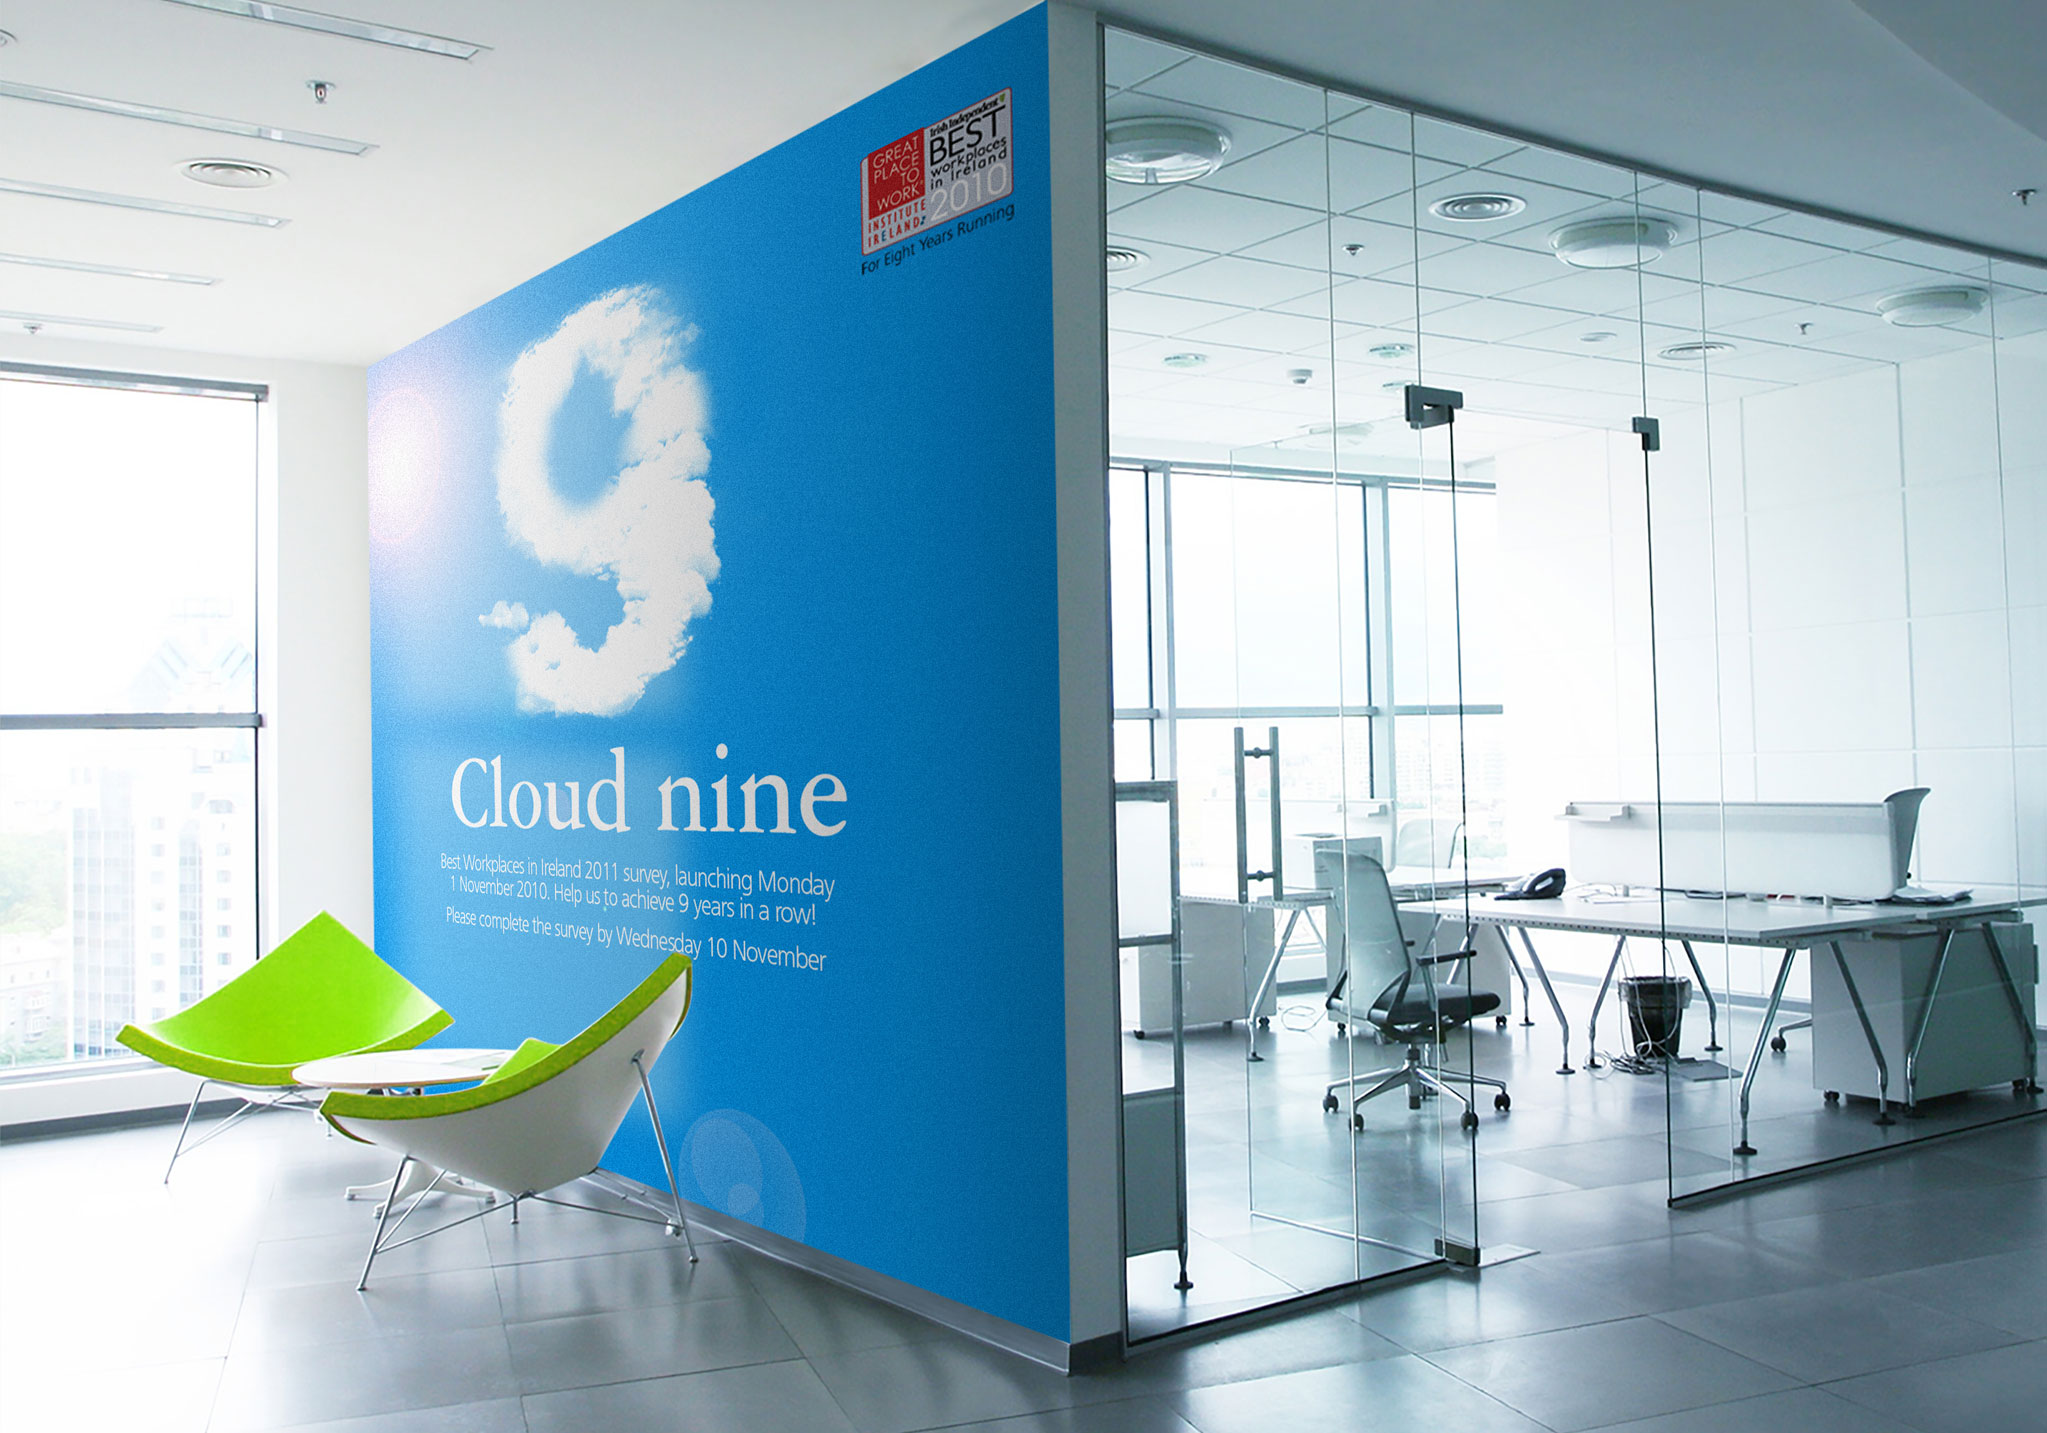 Large wall graphic showing a number nine made up from clouds with green chairs infront